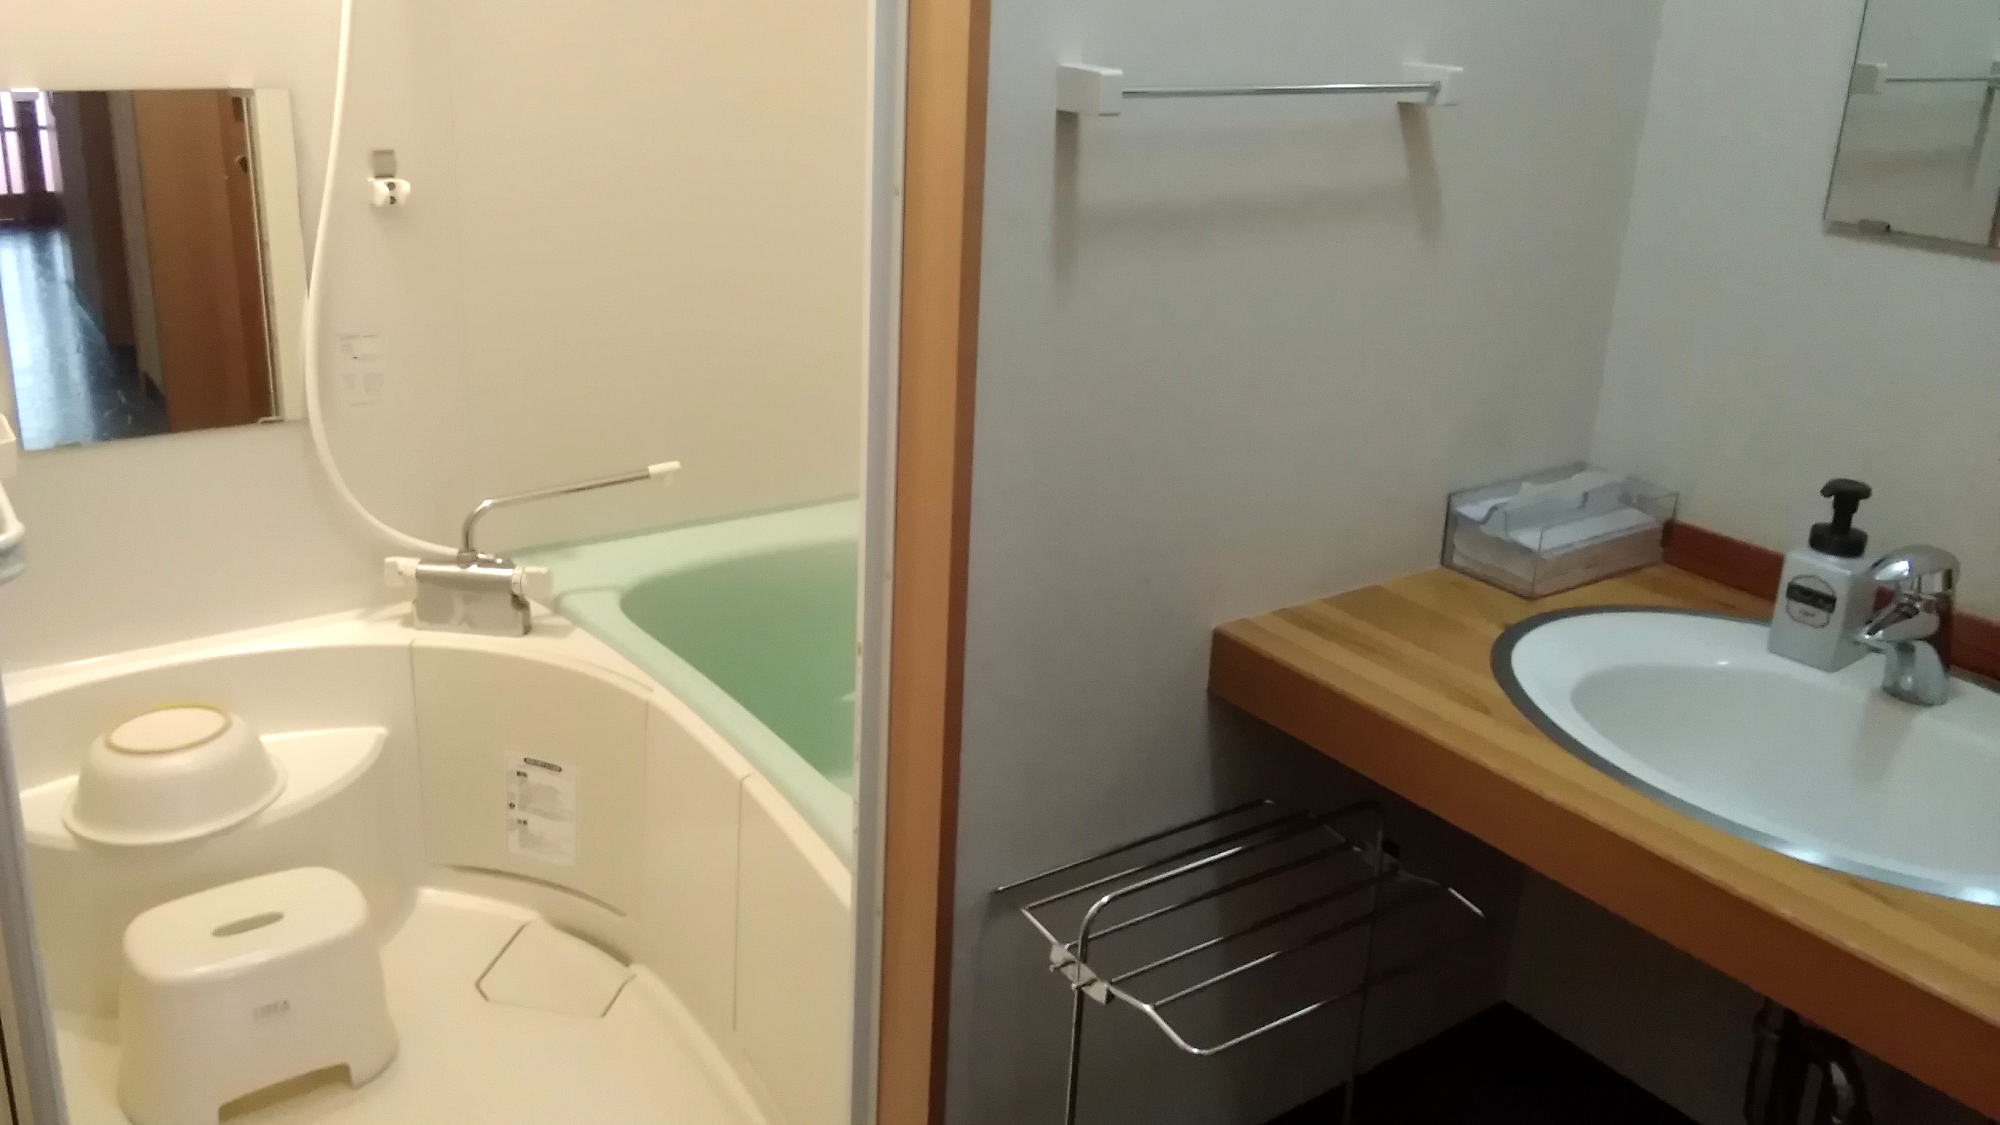 [Bathroom and bathroom in a special room] An example